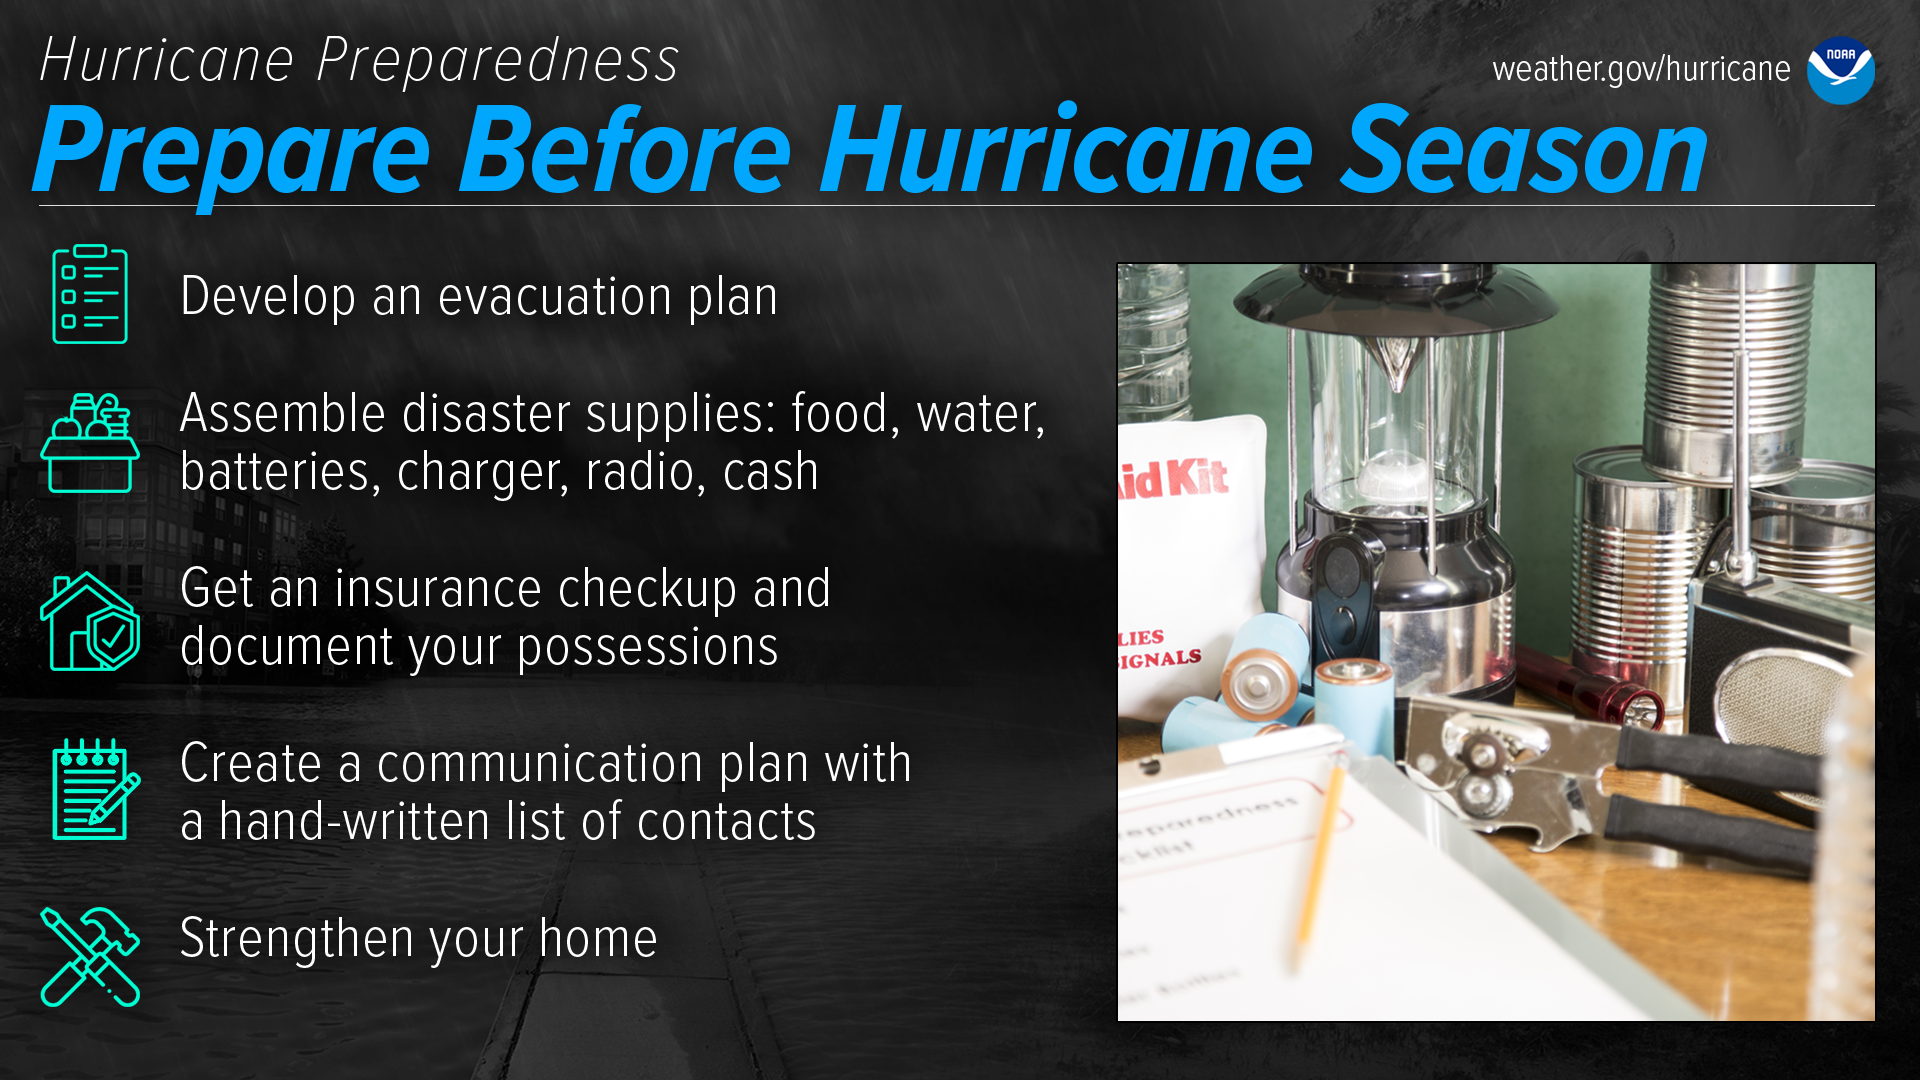 Hurricane Preparedness - Prepare Before Hurricane Season. Develop an evacuation plan. Assemble disaster supplies: food, water, batteries, charger, radio, cash. Get an insurance checkup and document your possessions. Create a communication plan with a hand-written list of contacts. Strengthen your home.